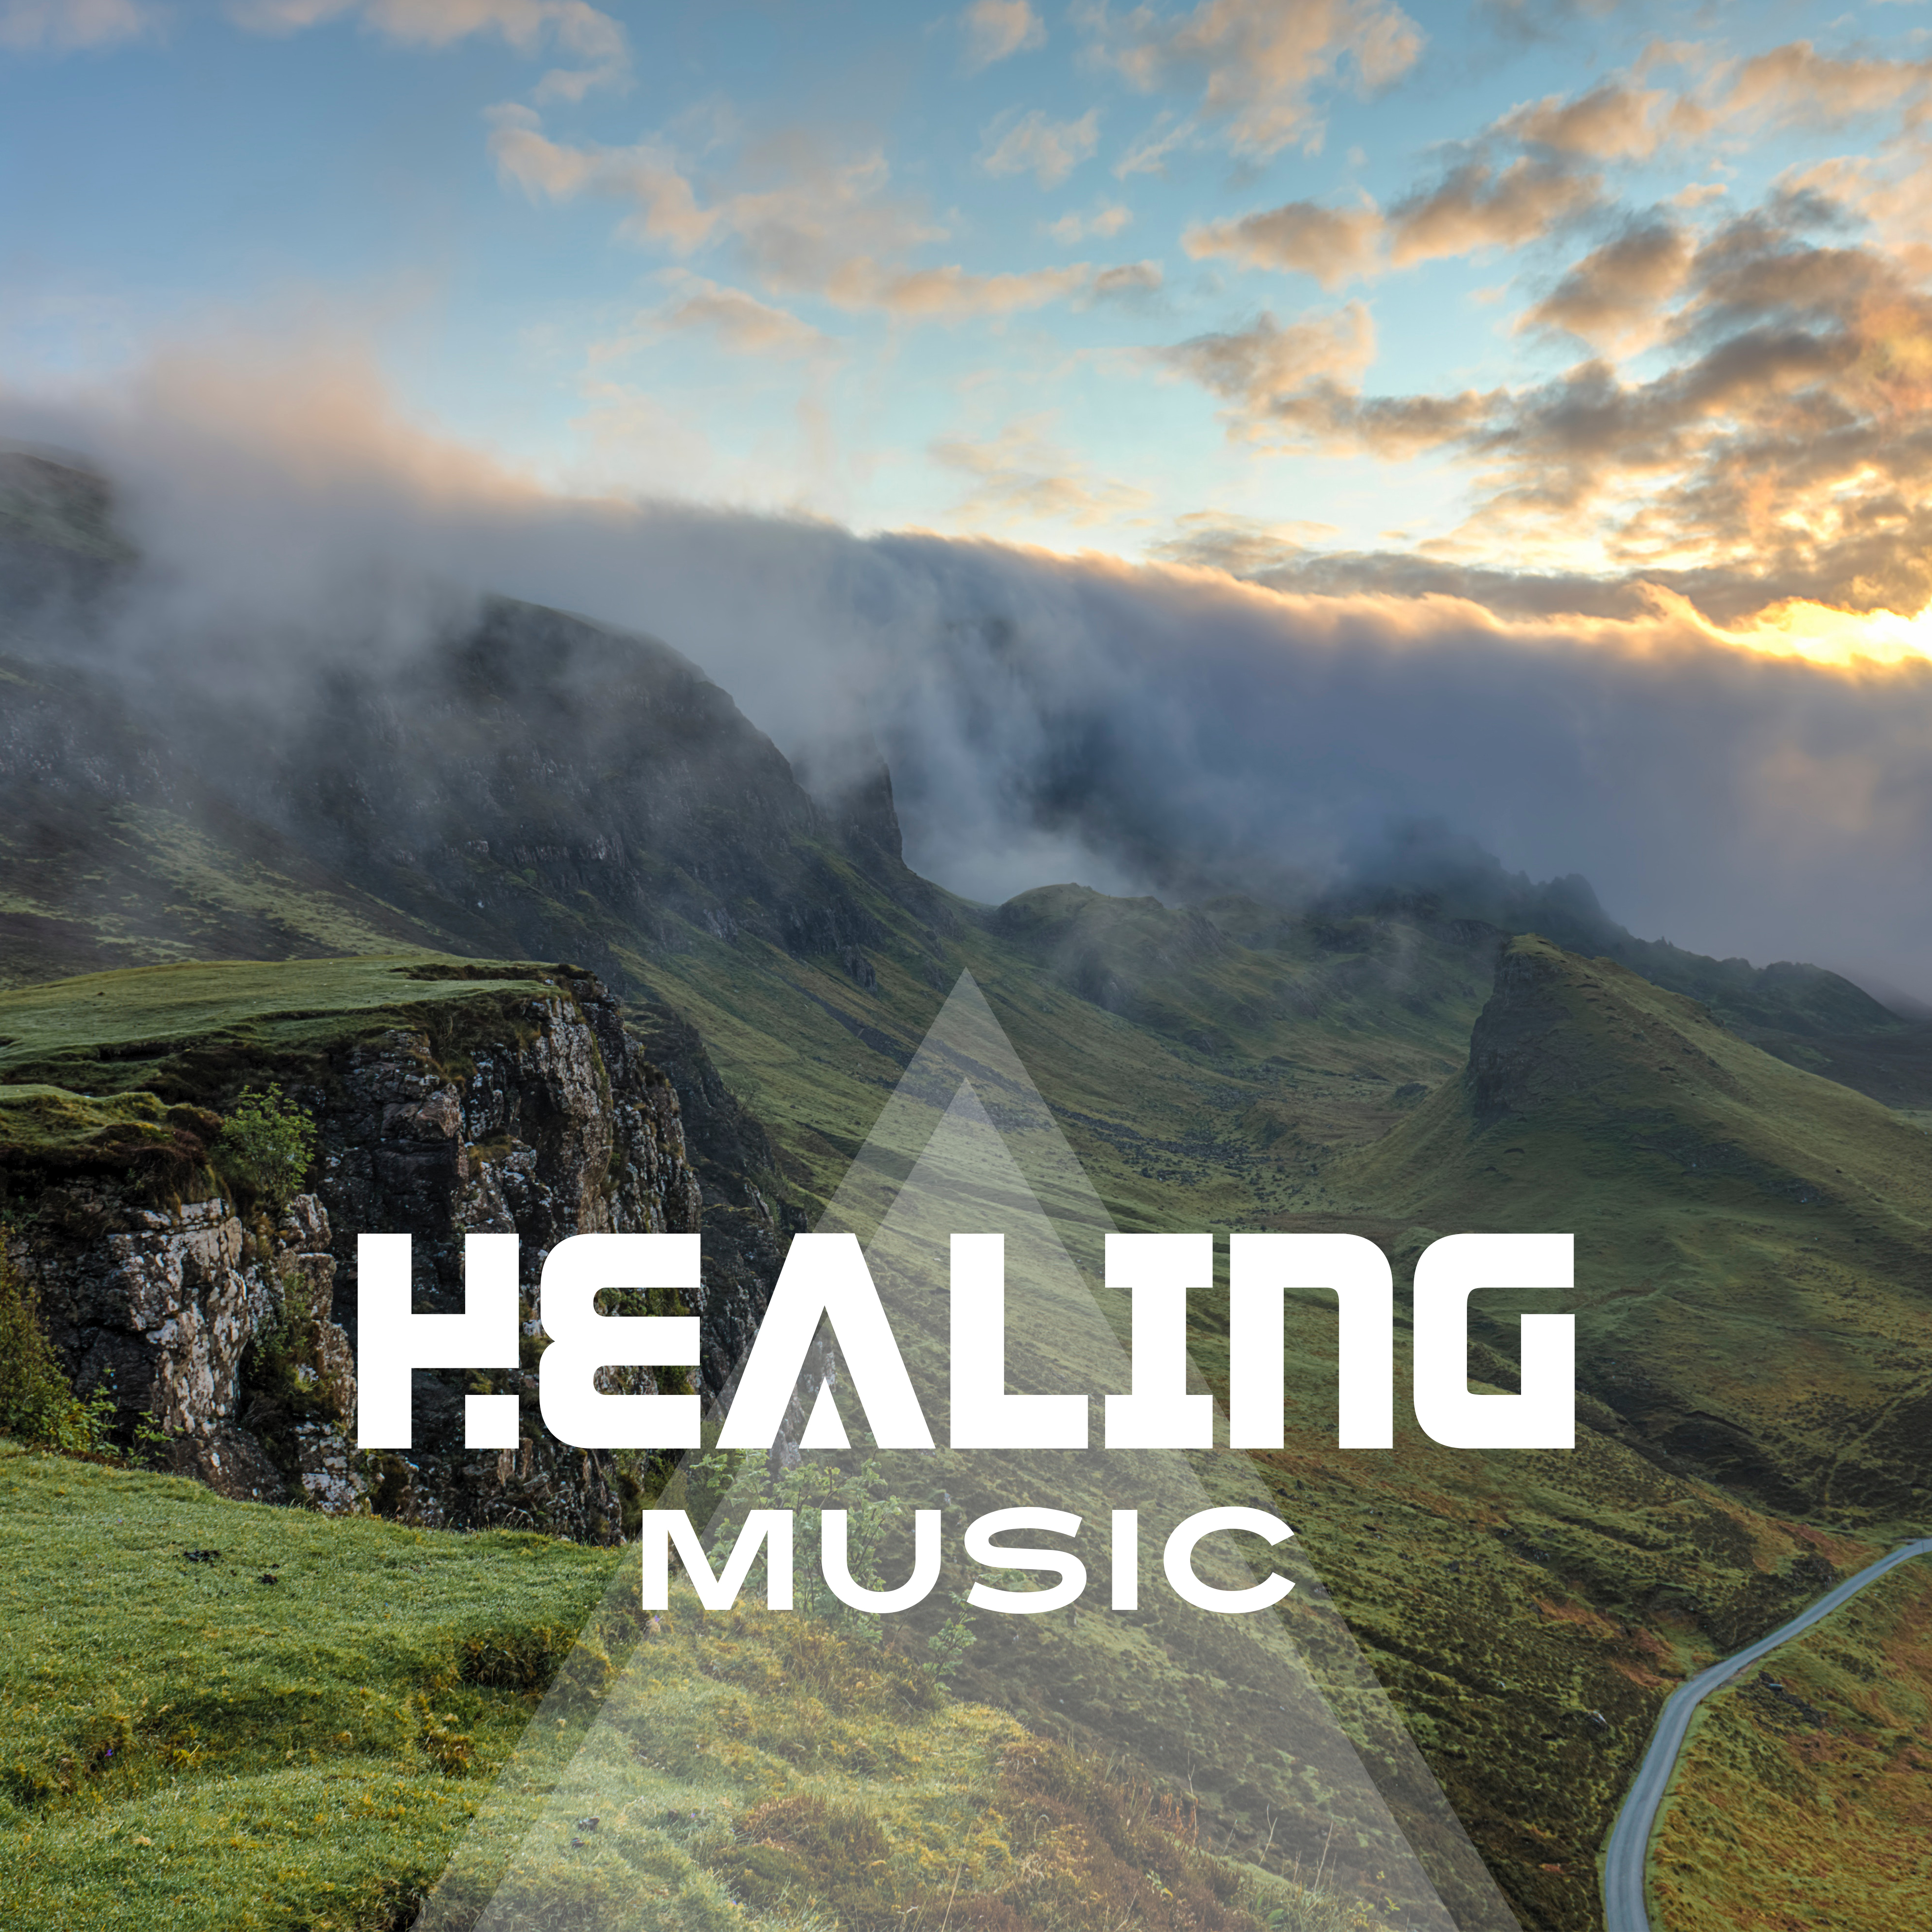 Healing Music  Pure Relaxation, Zen Energy, Soft Music to Calm Down, Inner Silence, Rest